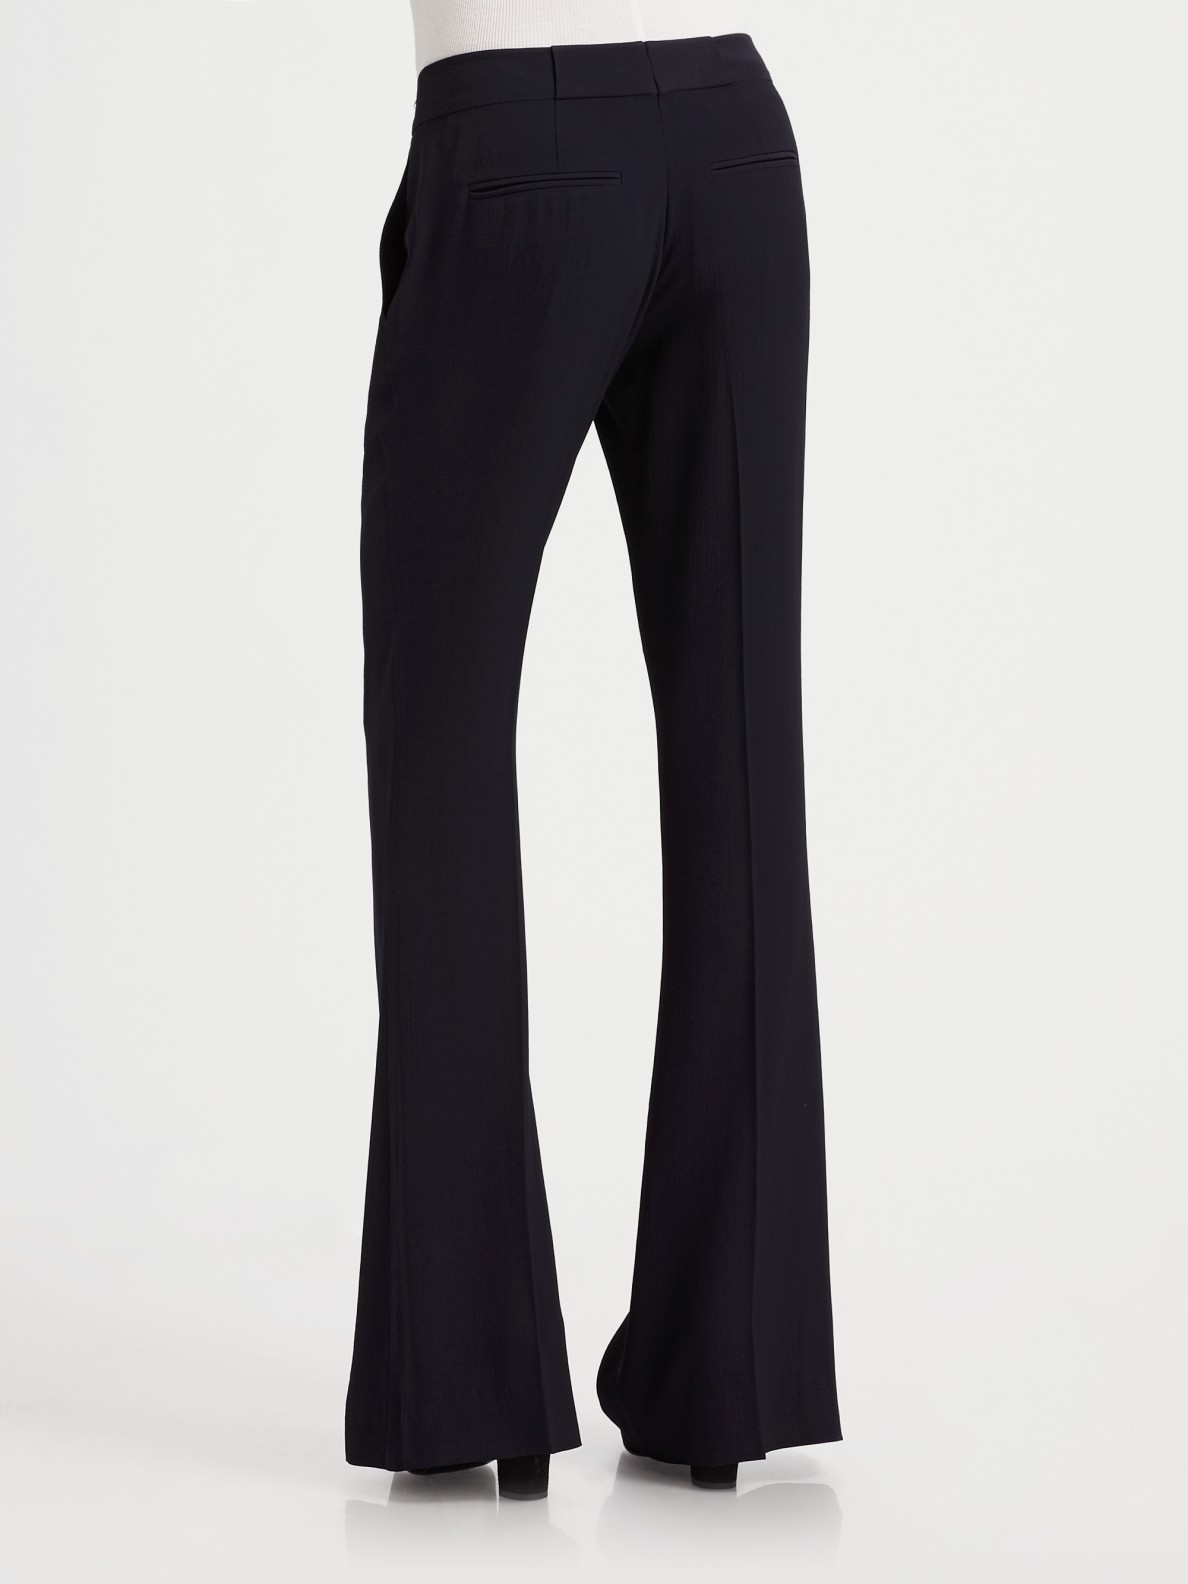 Lyst - Theory Jeldra Wool-blend Fit and Flare Pants in Black